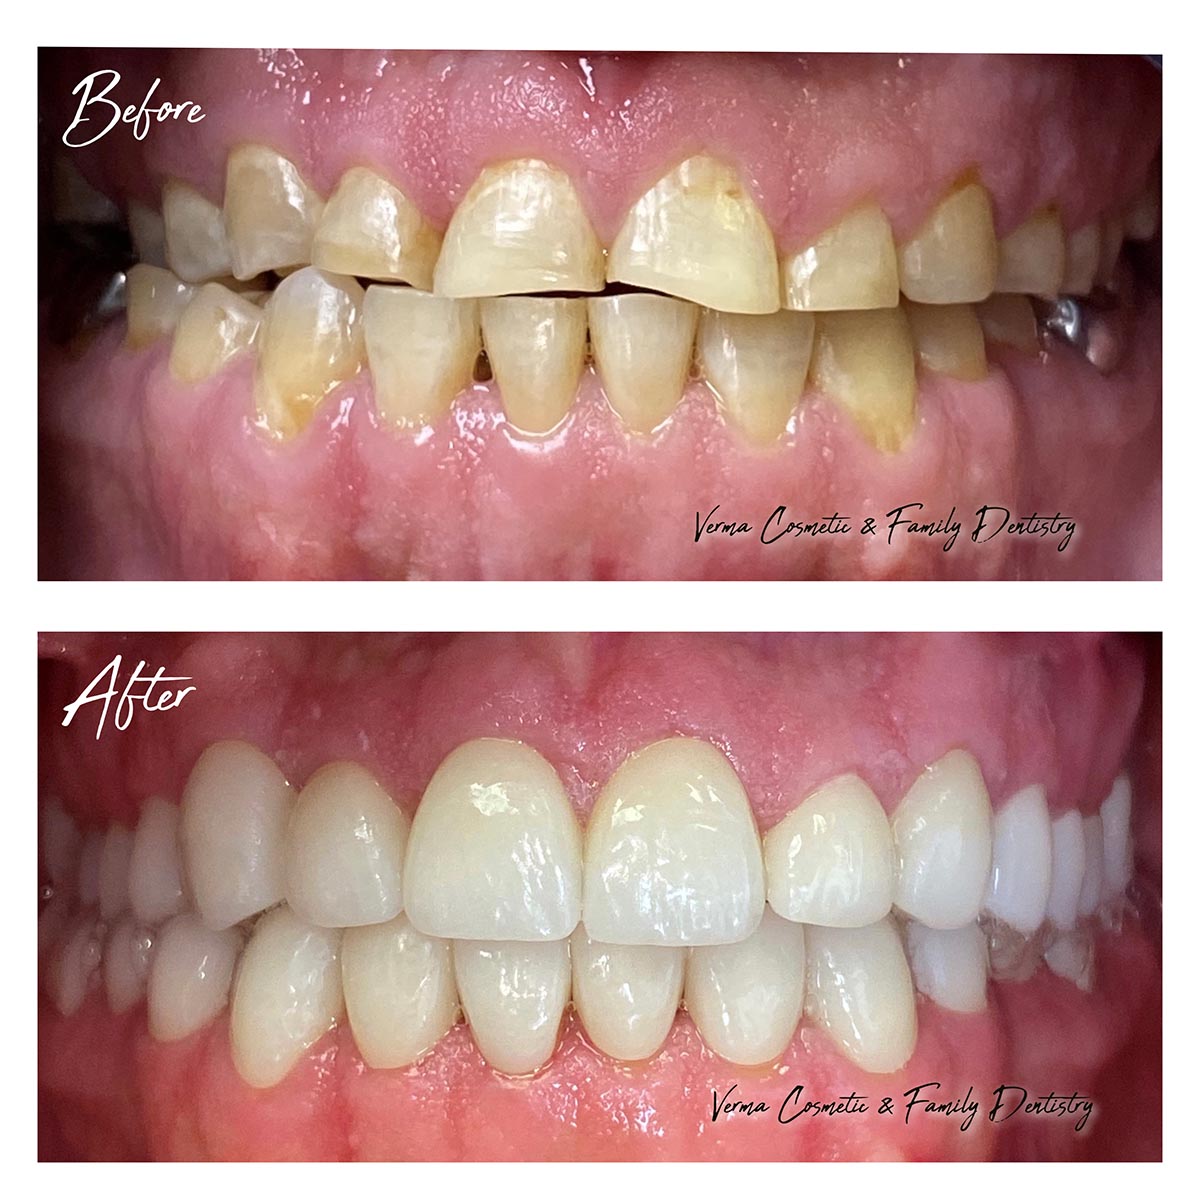 dr-verma-before-after (1)